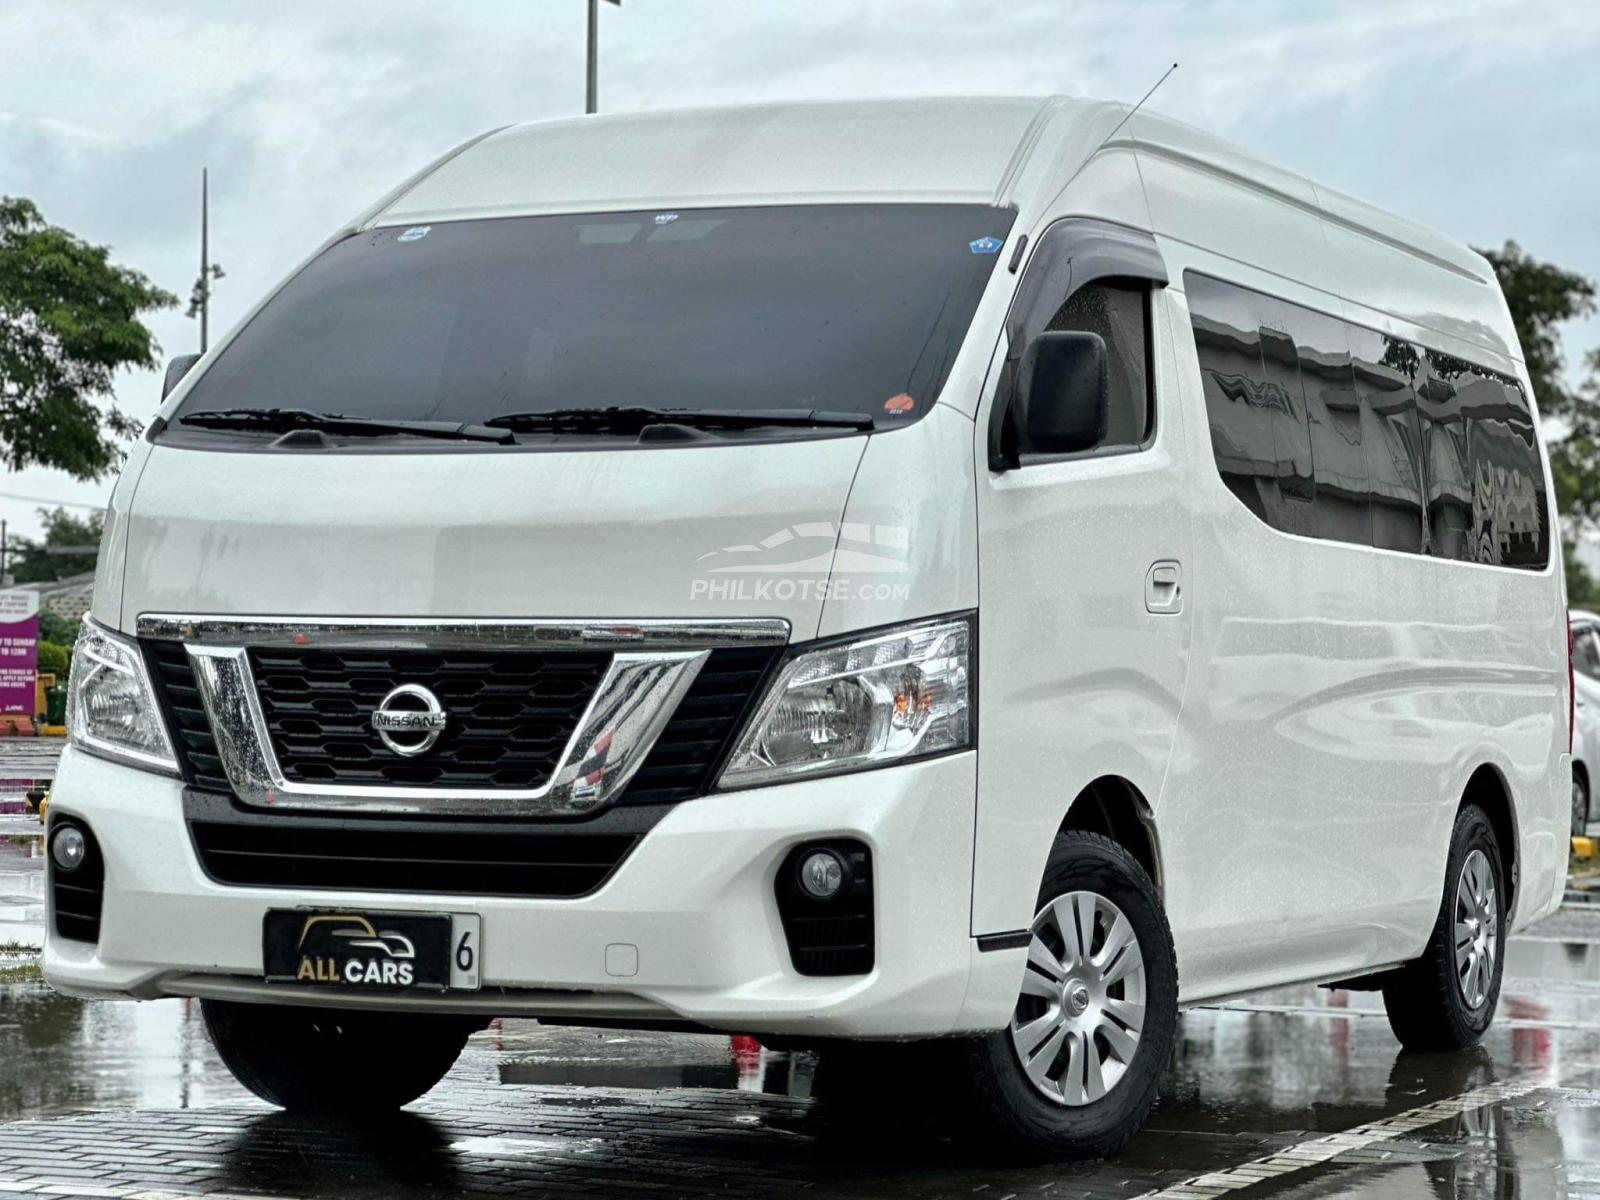 Buy Used Nissan NV350 Urvan 2018 for sale only ₱1188000 - ID834316